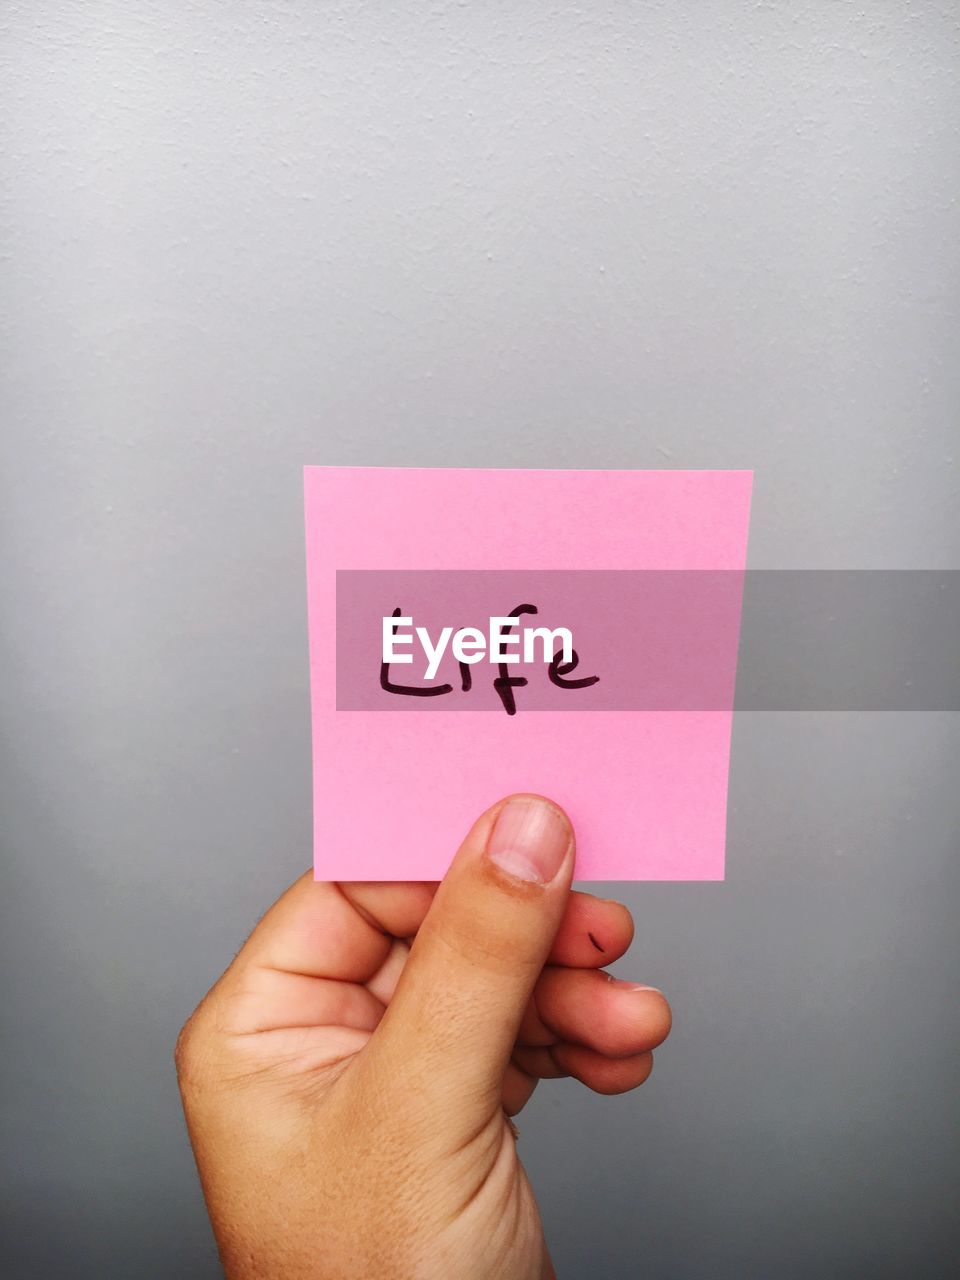 Cropped hand of person holding life text on adhesive note against gray background